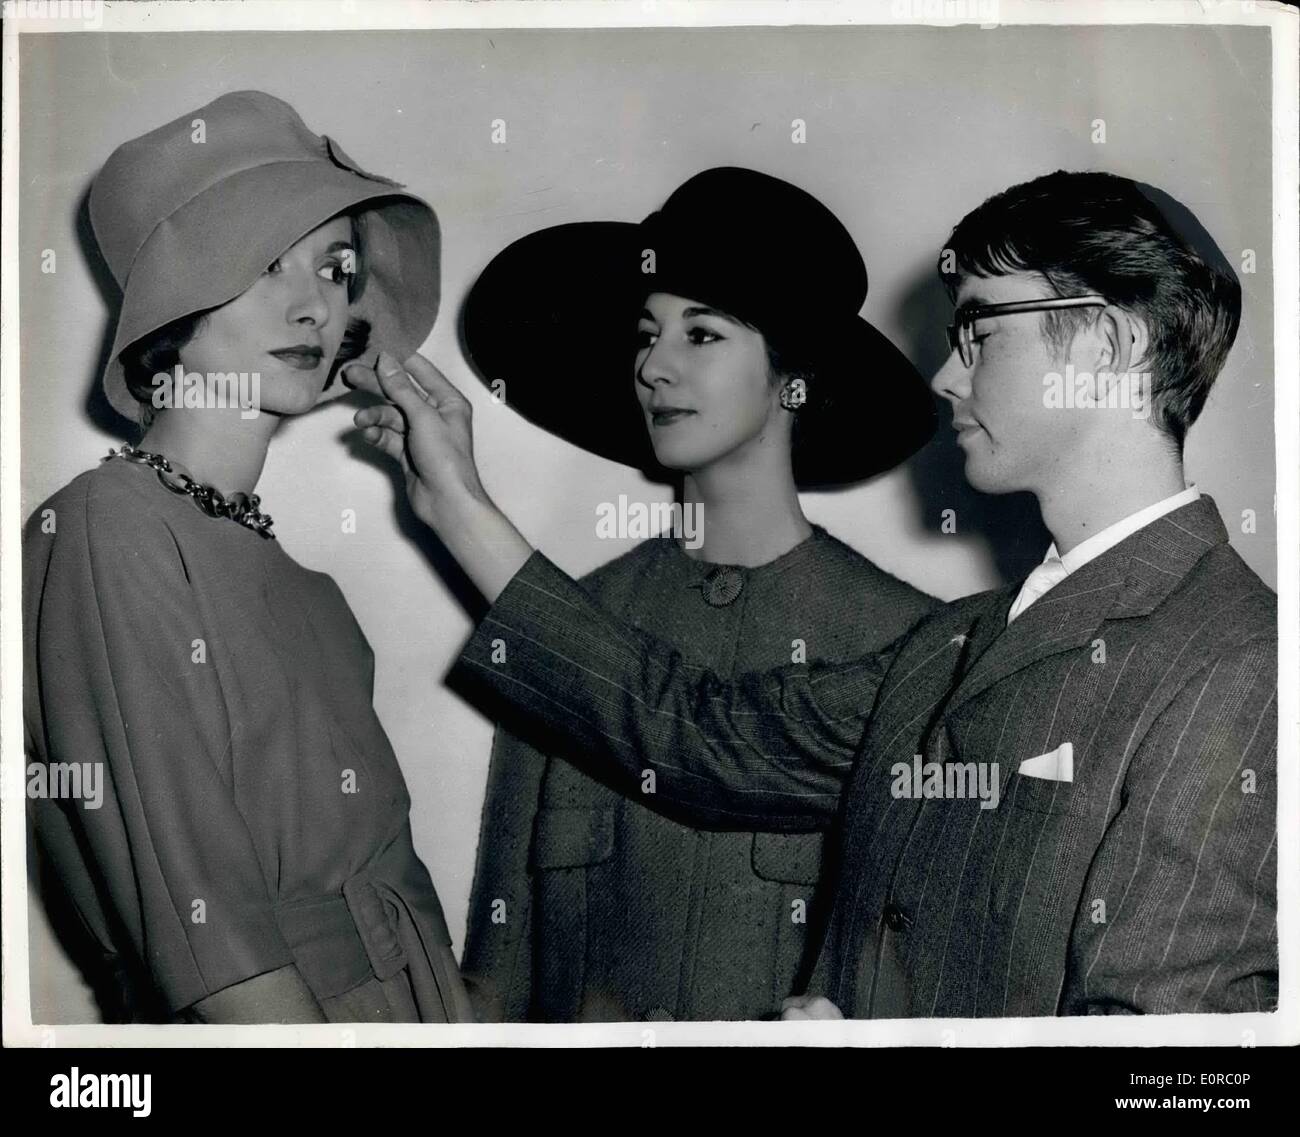 Dec. 12, 1958 - BRITISH YOUTH GETS A TOP JOB IN PARIS FASHIONS. GRAHALI SMITH, 20, of Bexley, Kent, a hat designer, ban juat landed a top Paris job.He hae been appointed chief designer of hate to the House of Lanvin-Castillo. Graham, four ycsro a student of the Royal College of Art, hit the jackpot in jabs when he was oalled to Paris by Lioneleur Ceetillo, hood of the fashion house. He went to Franco with all his savingo -K5, and woo asked to design oome bats ''on trial''. The directors were no impre000d that they offered him a job there and then Stock Photo